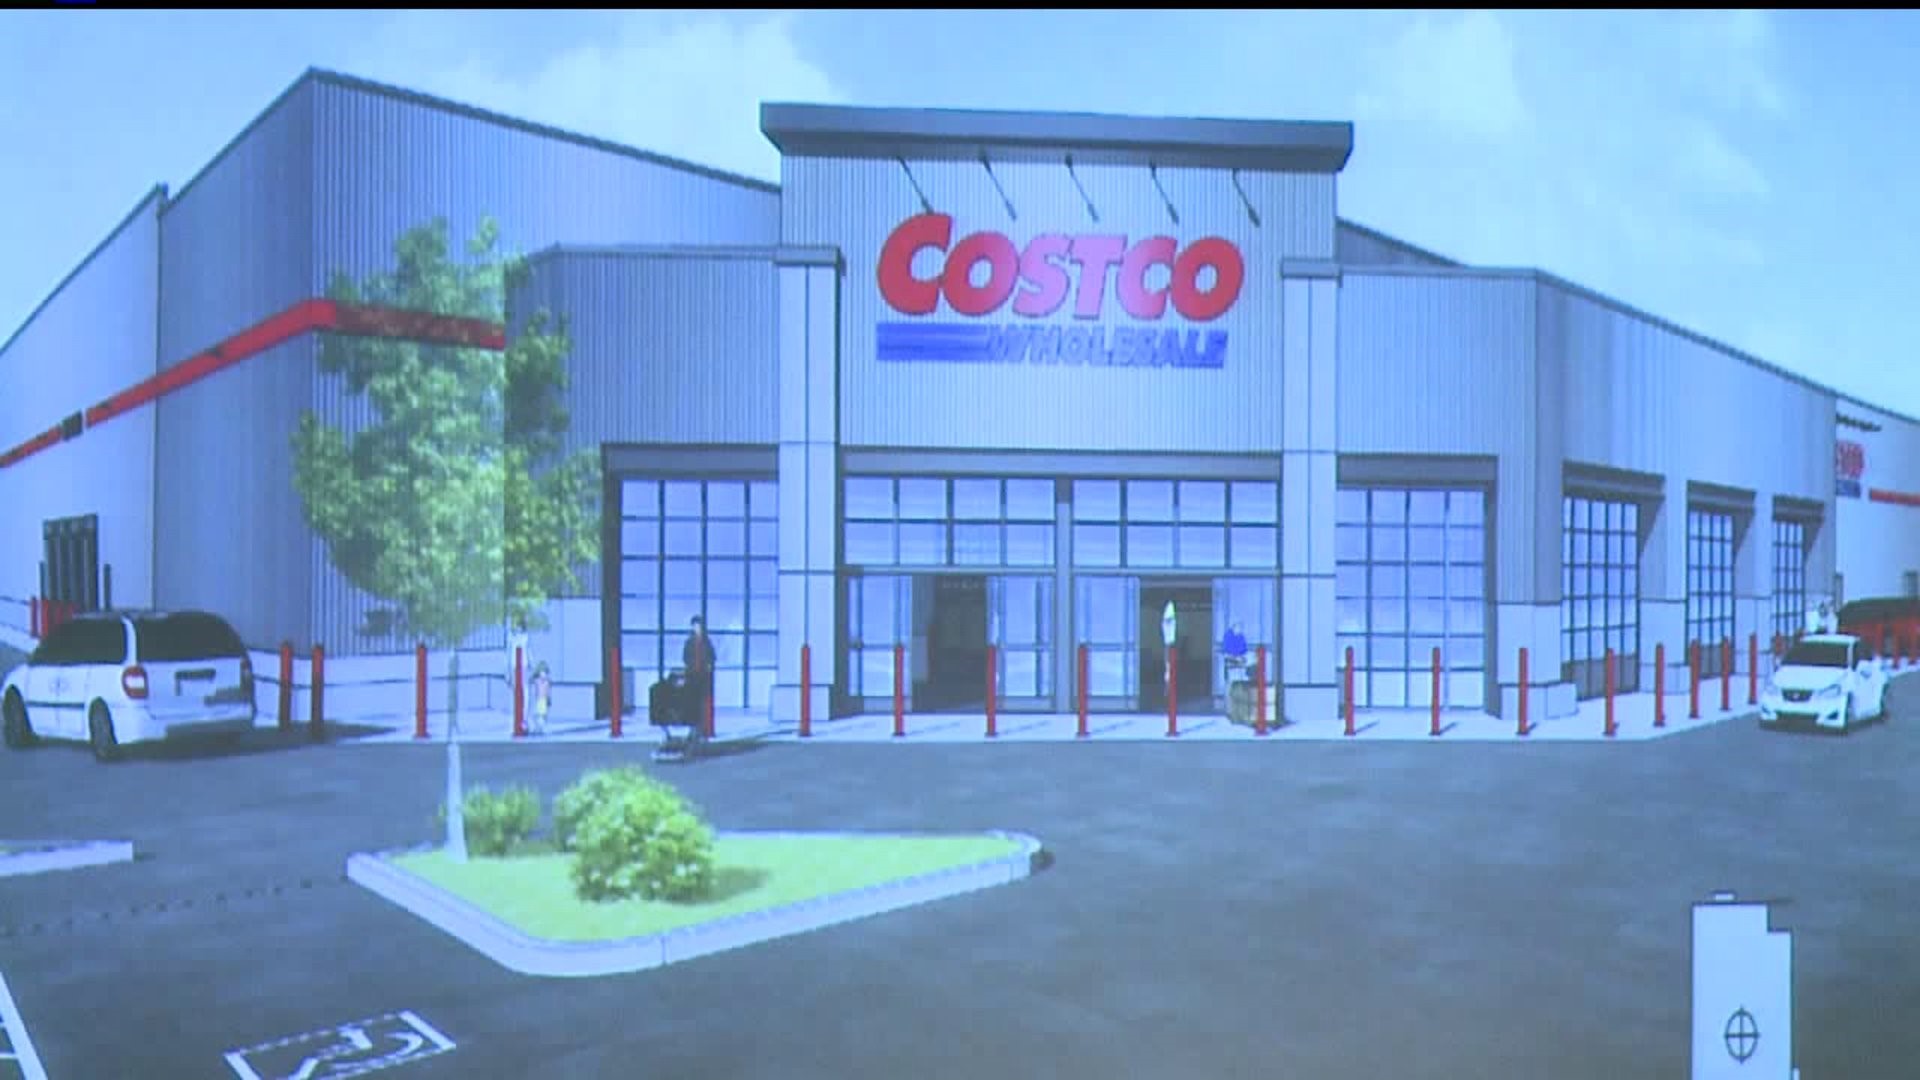 Costco Aproved to Build in Davenport